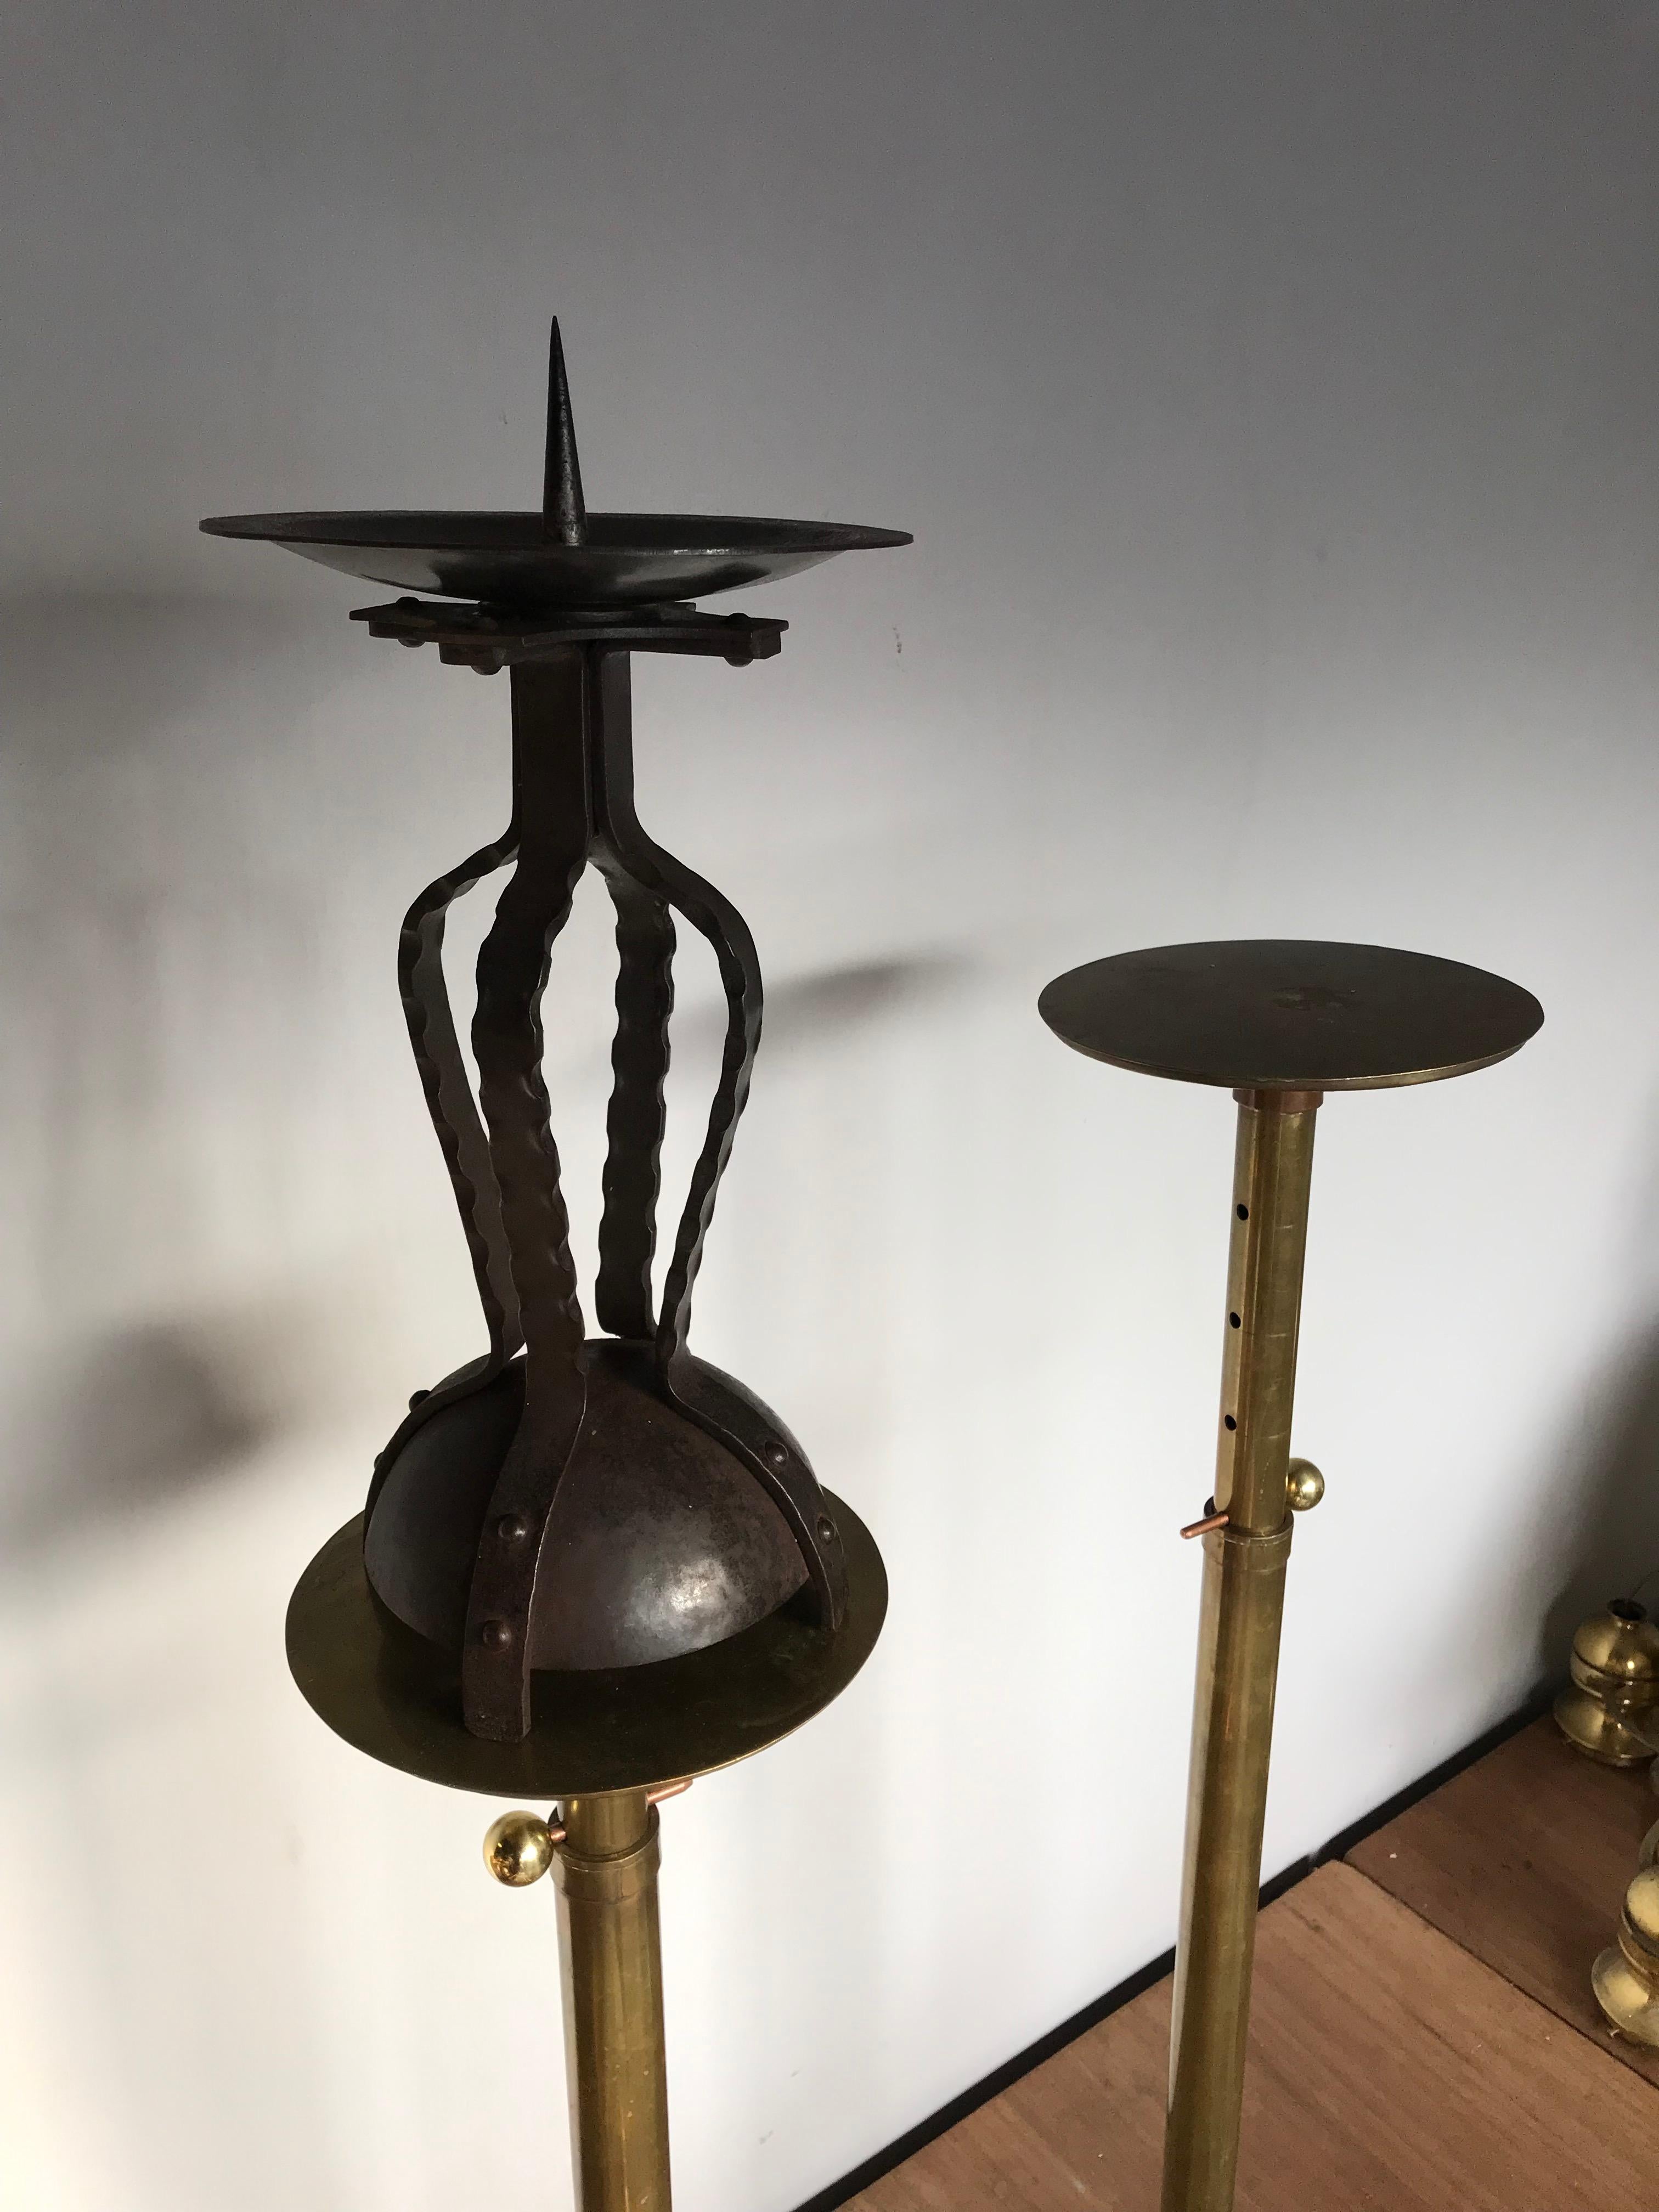 European Artistic Design and All Handcrafted, Wrought Iron Arts & Crafts Candlestick For Sale